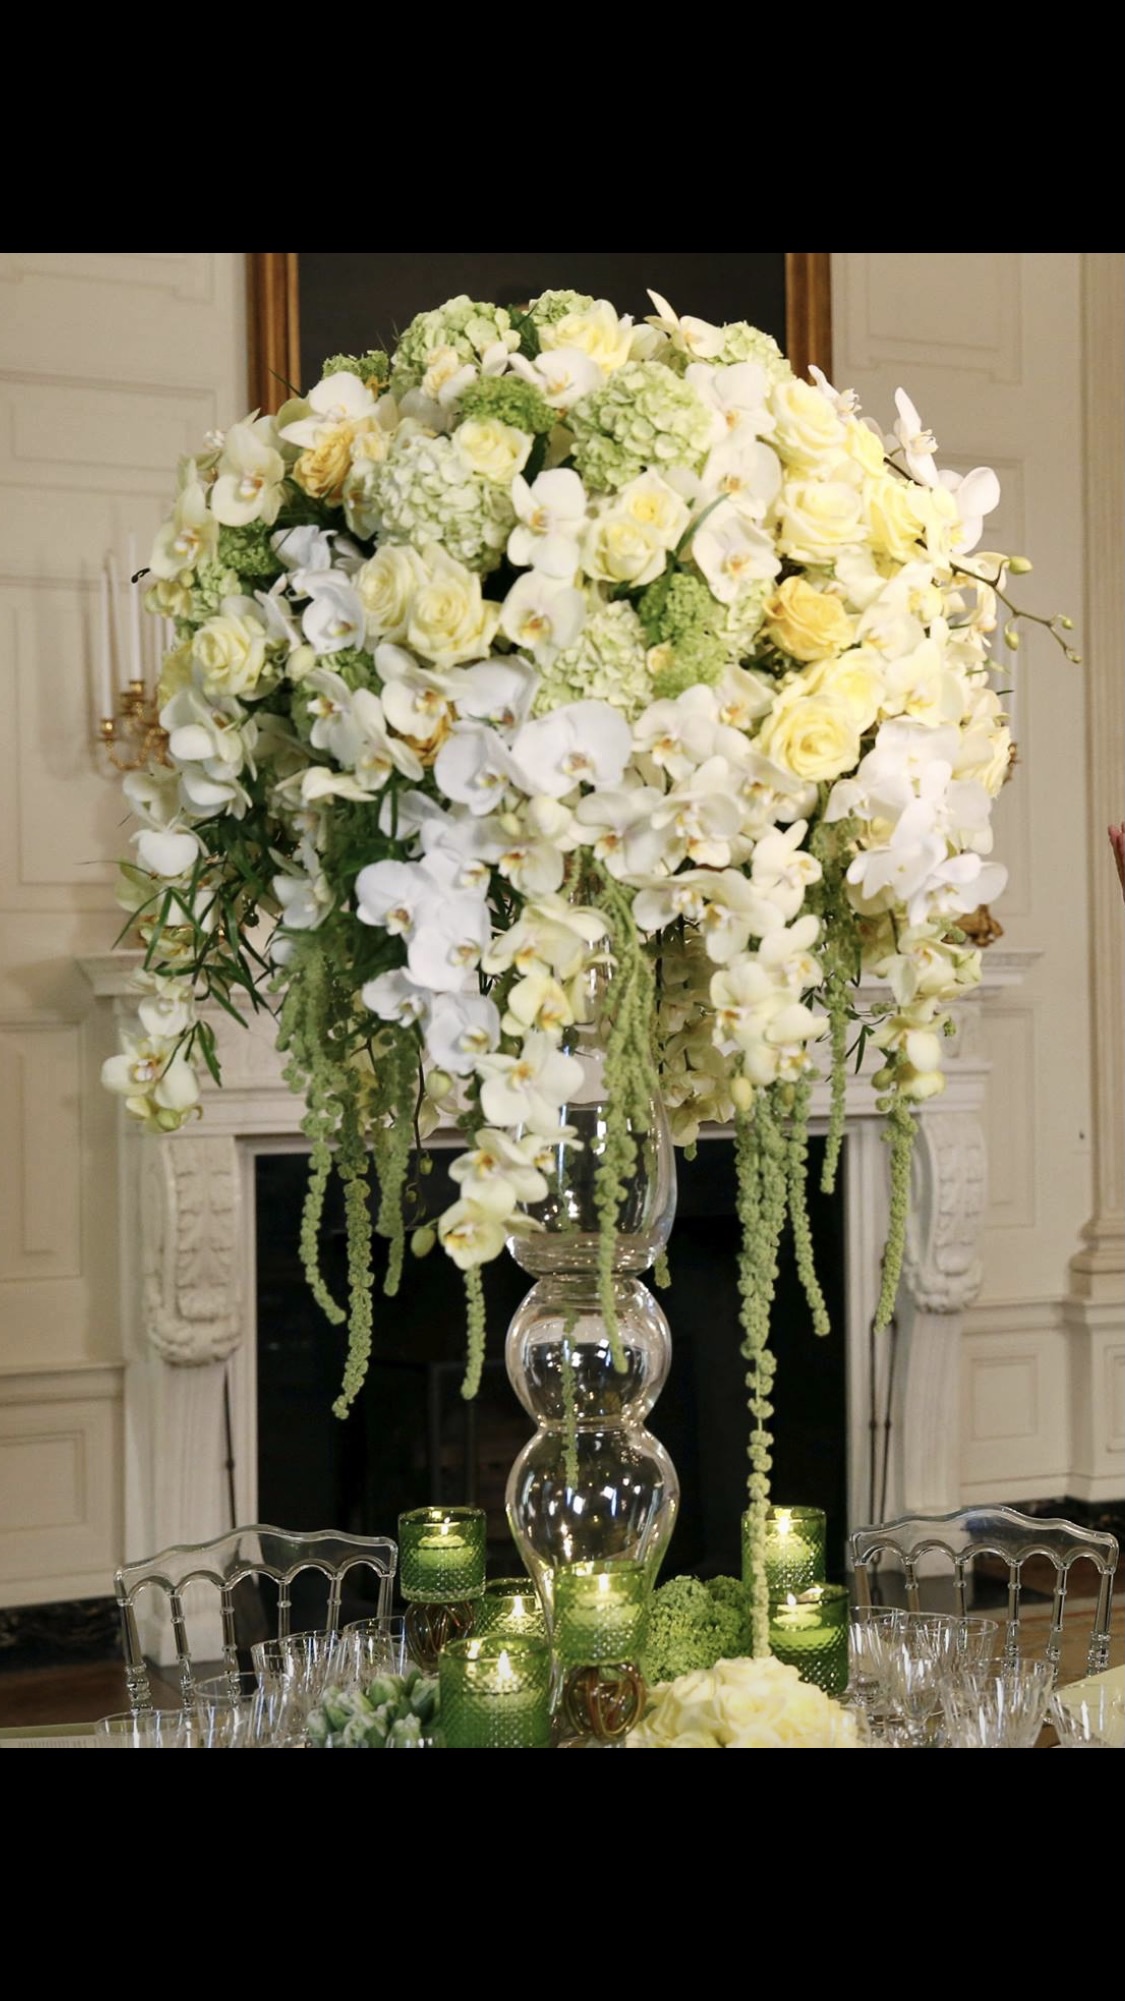 A large vase filled with flowers on top of a table.